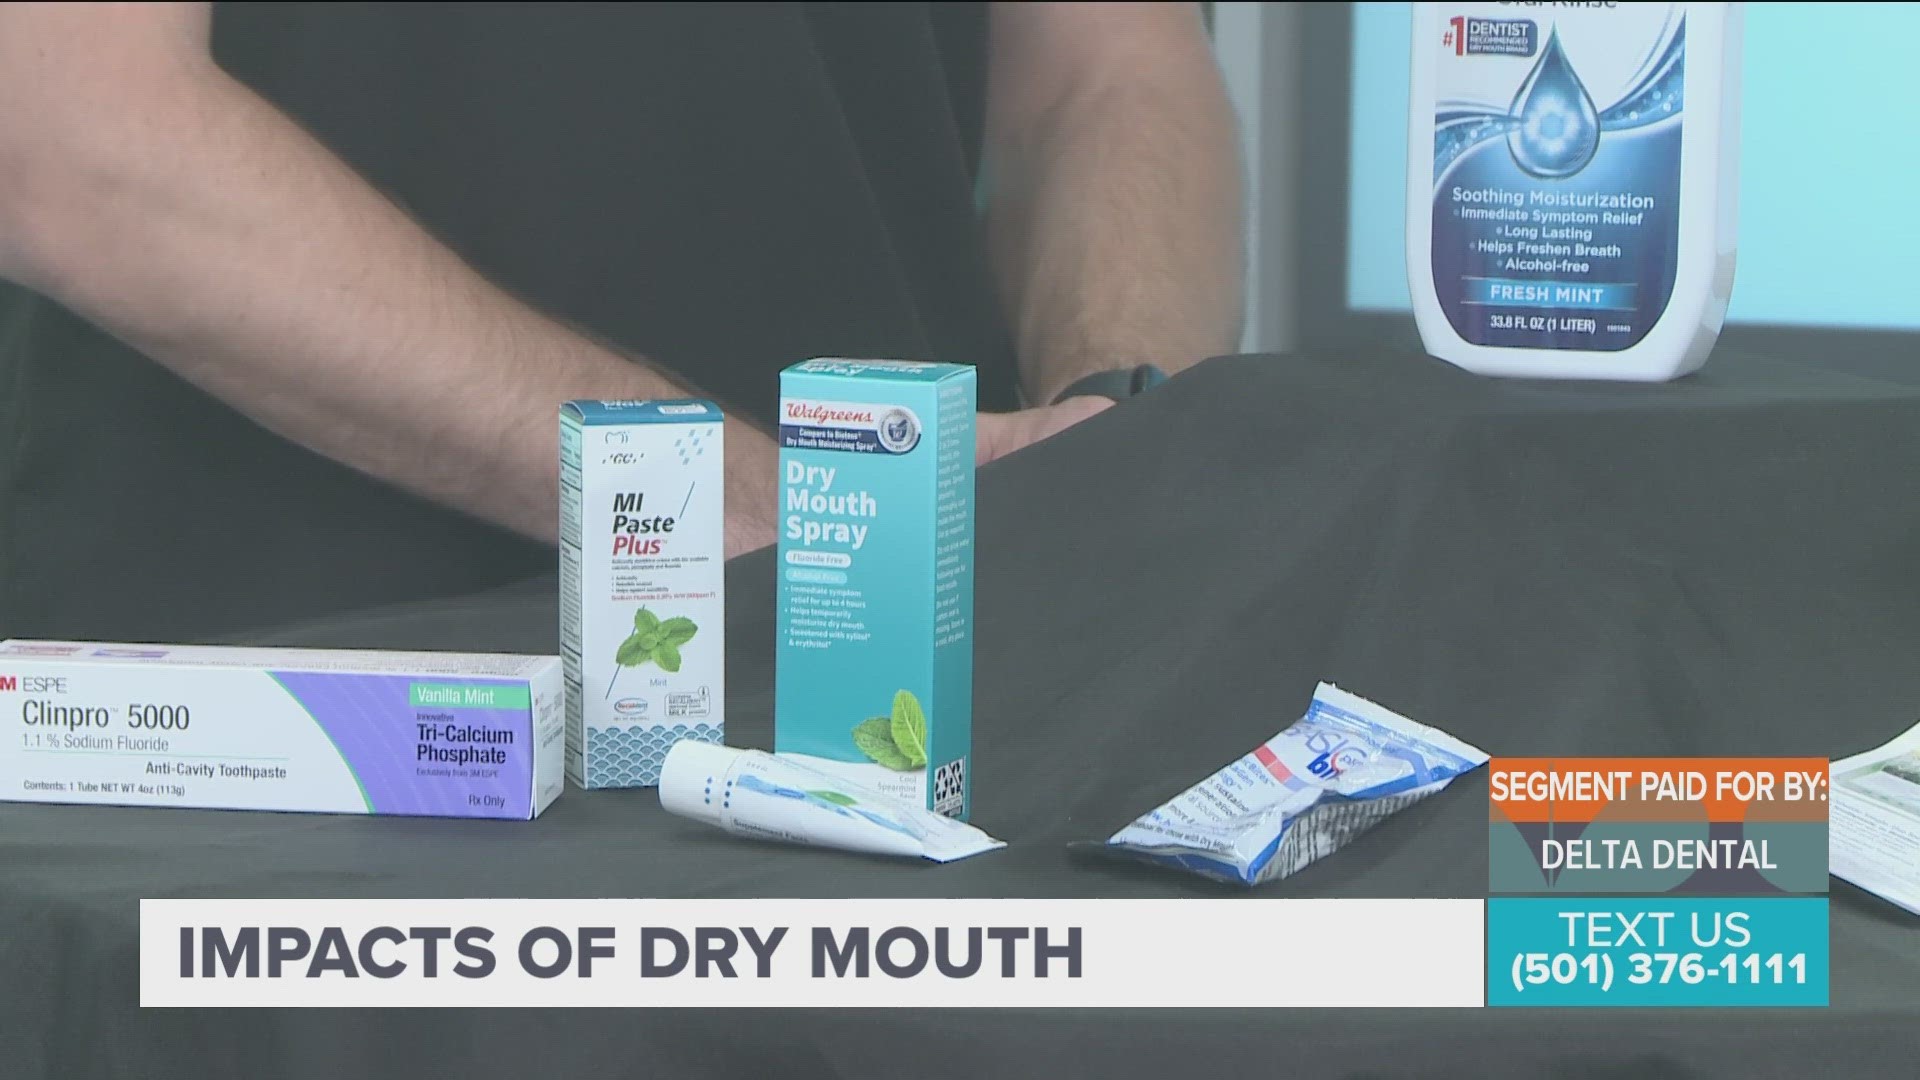 Dr. Ethan Ake with Delta Dental tells us more about dry mouth and how you can treat the condition.